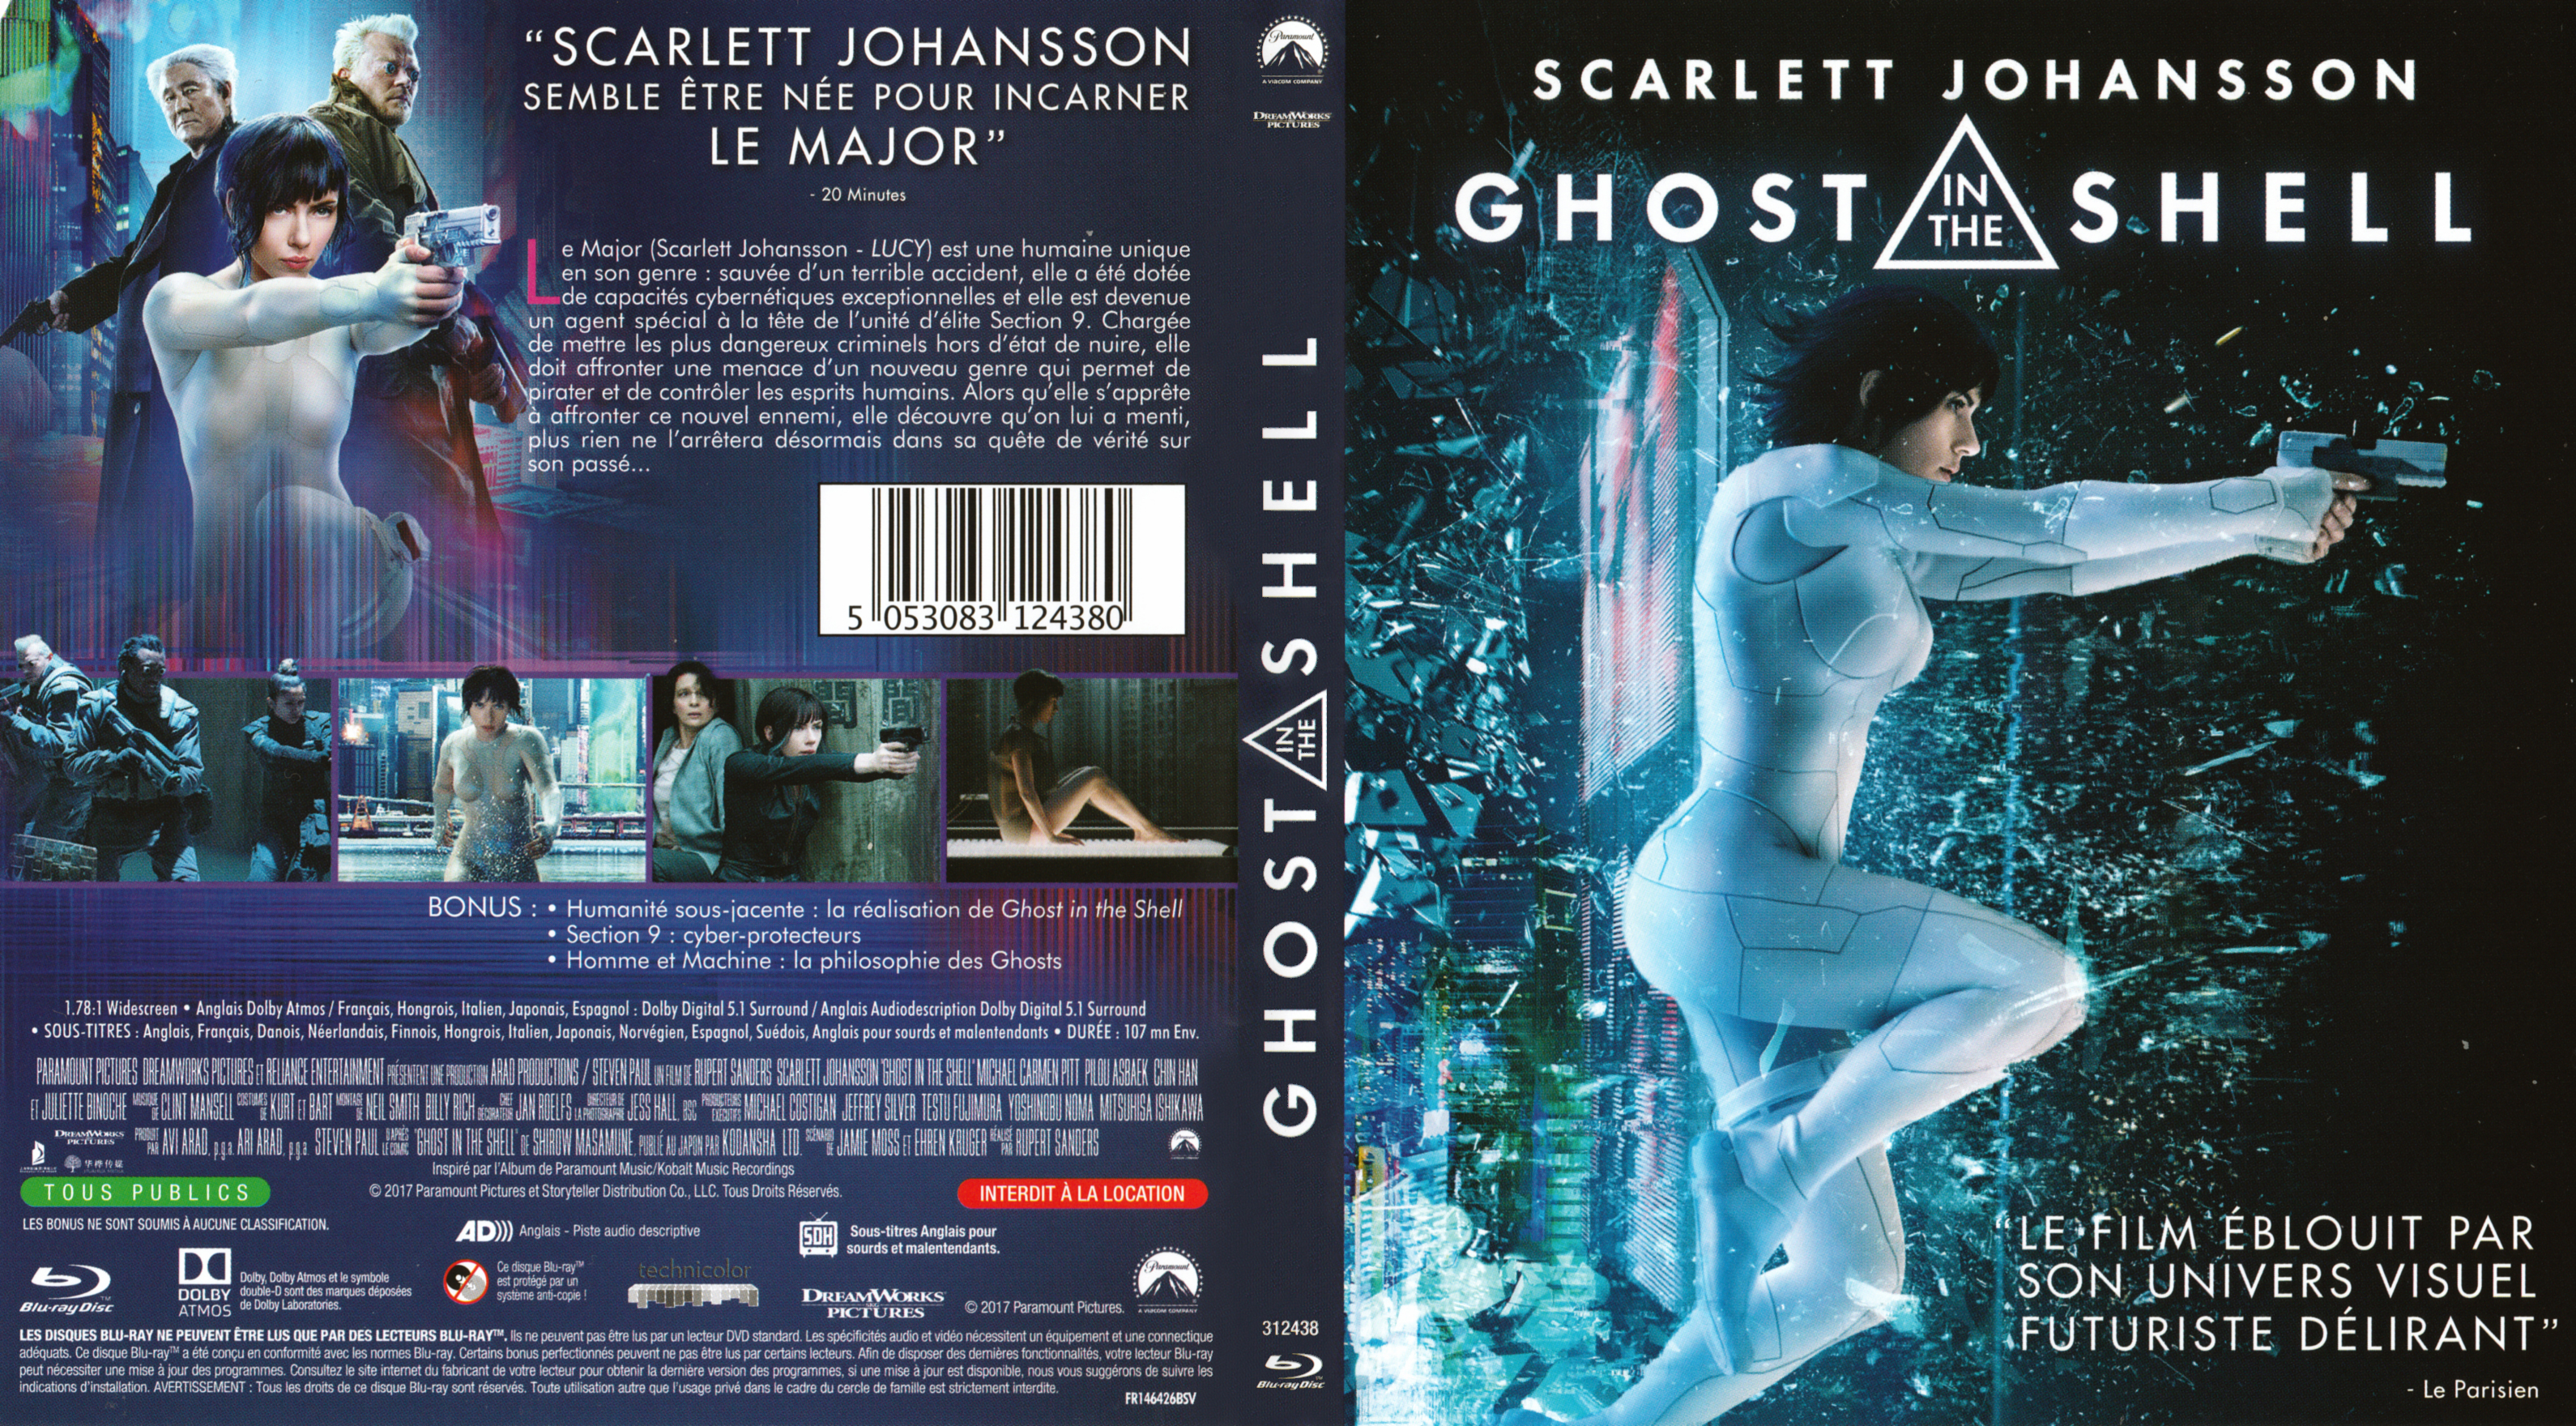 Jaquette DVD Ghost in the Shell (FILM) (BLU-RAY)